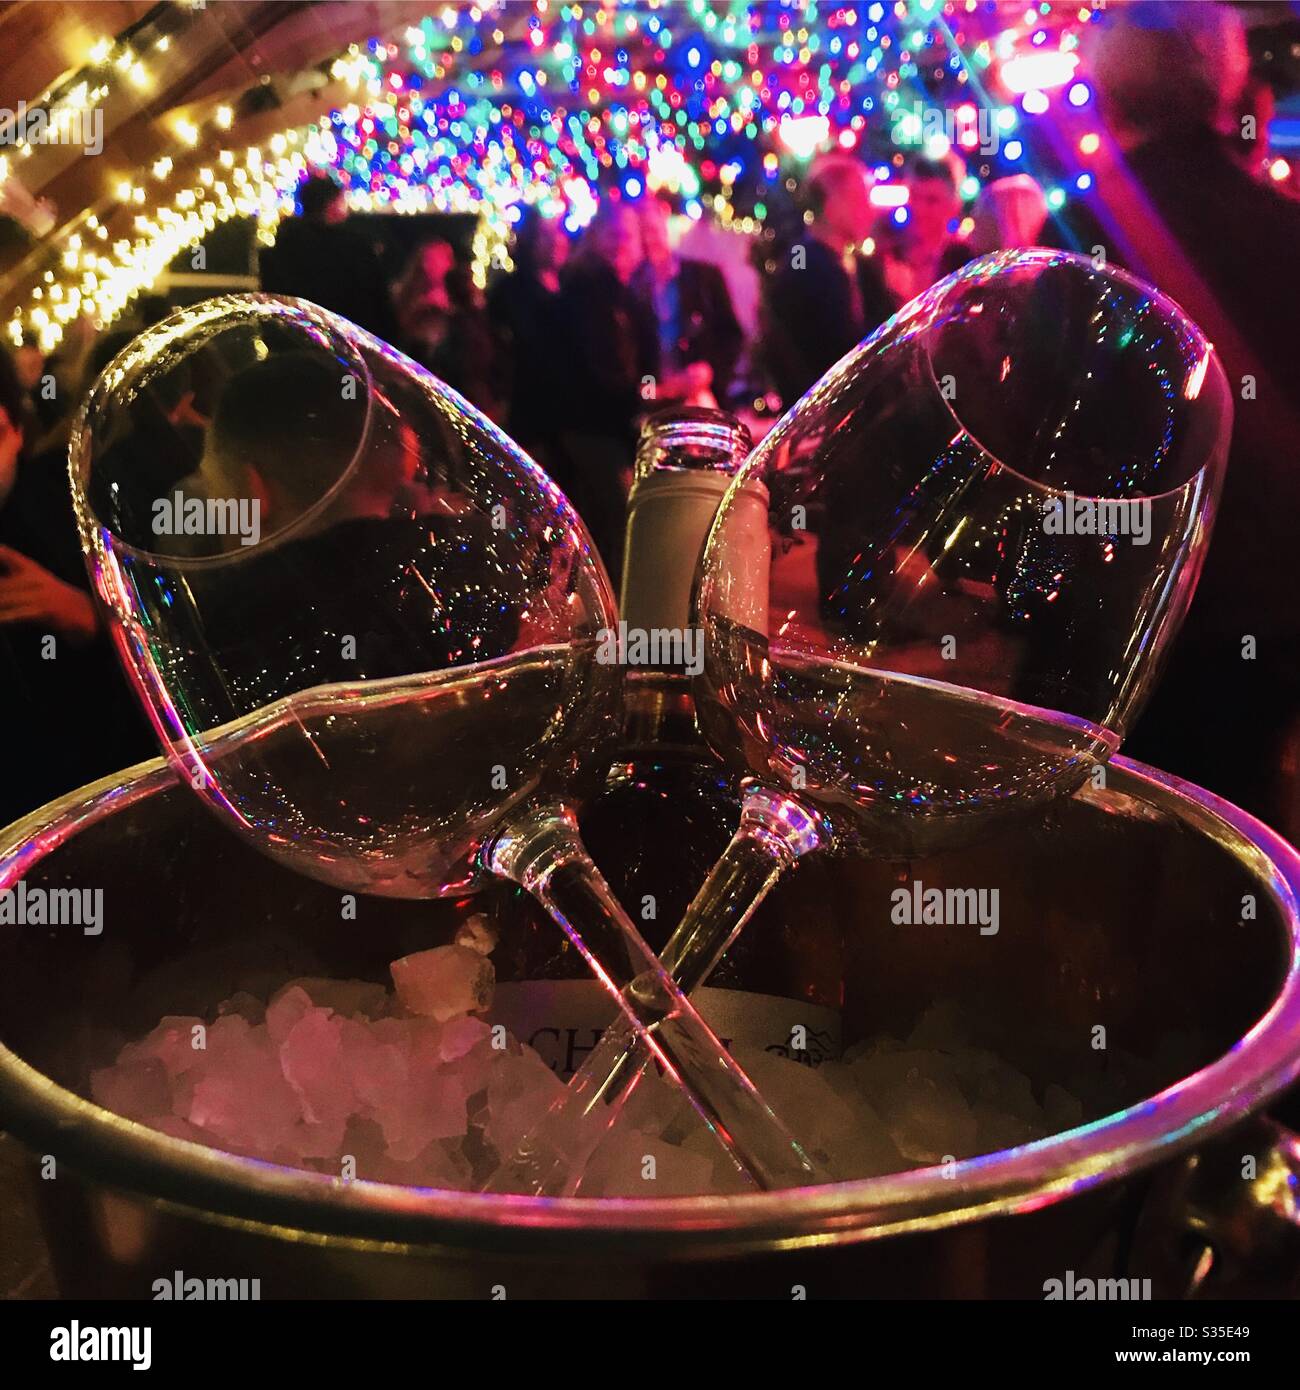 Wine and glasses in an ice bucket, under party lights Stock Photo